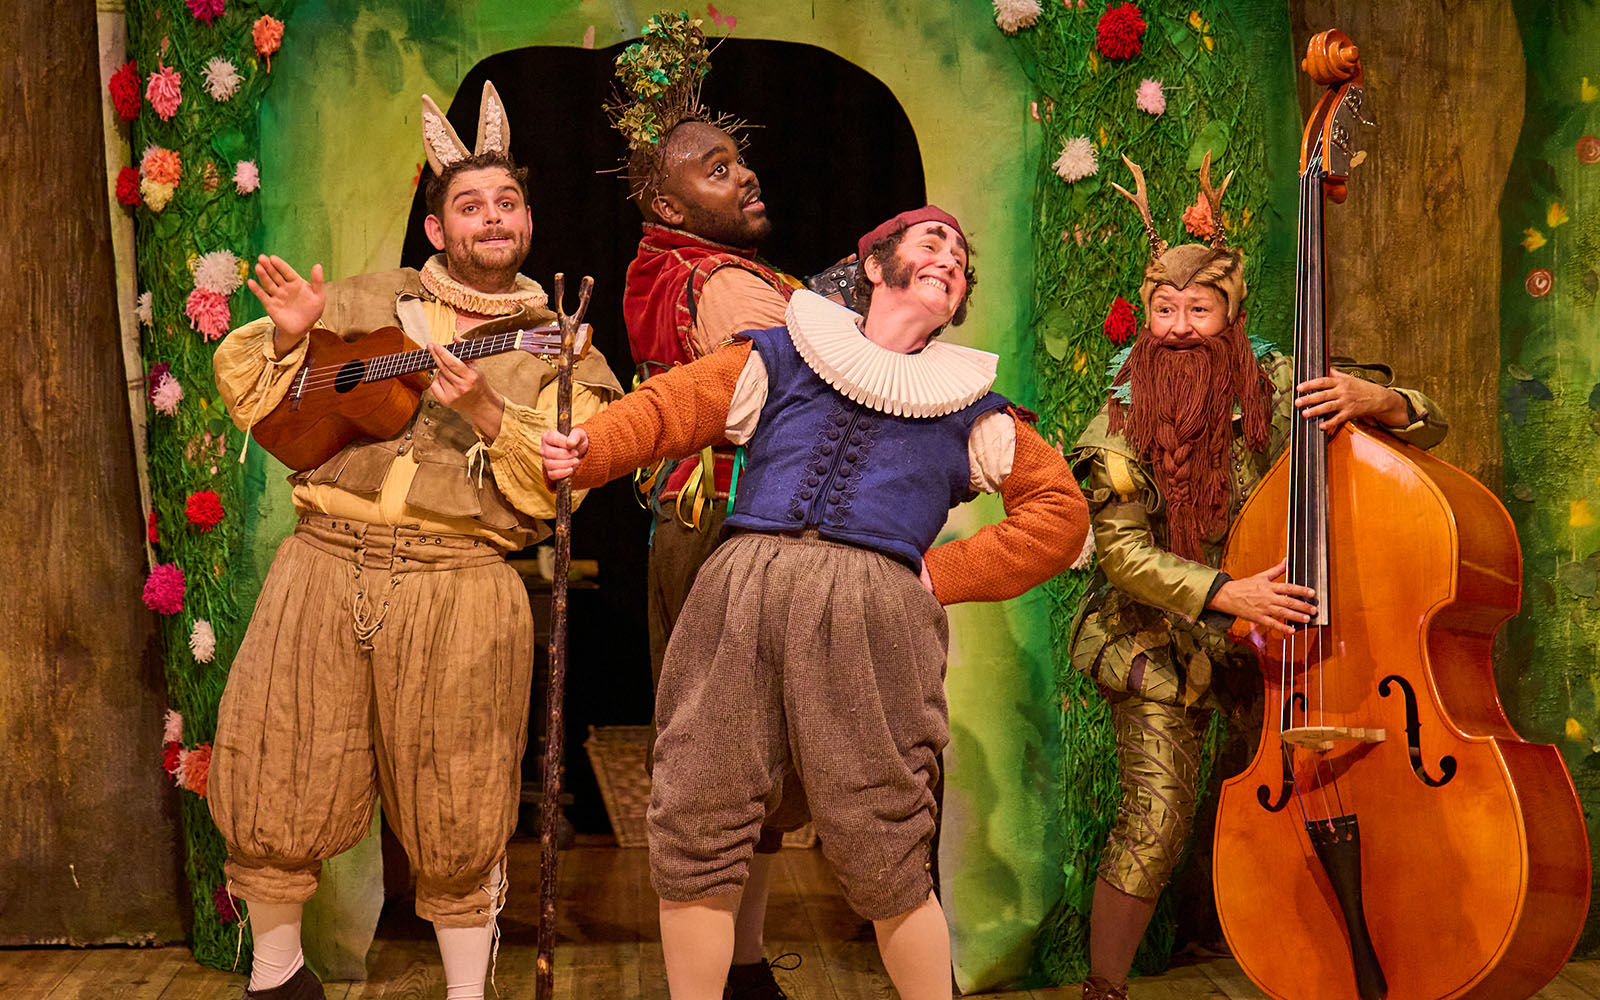 Full company of Midsummer Mechanicals. They all wear waistcoats and breeches. Sam Glen holds a ukulele and wears rabbit ears, while Jamal Franklin wears a headband with branches sticking out of the top. Kerry Frampton holds a walking stick and wears sideburns, while Melody Brown plays a double bass and wears a beard.